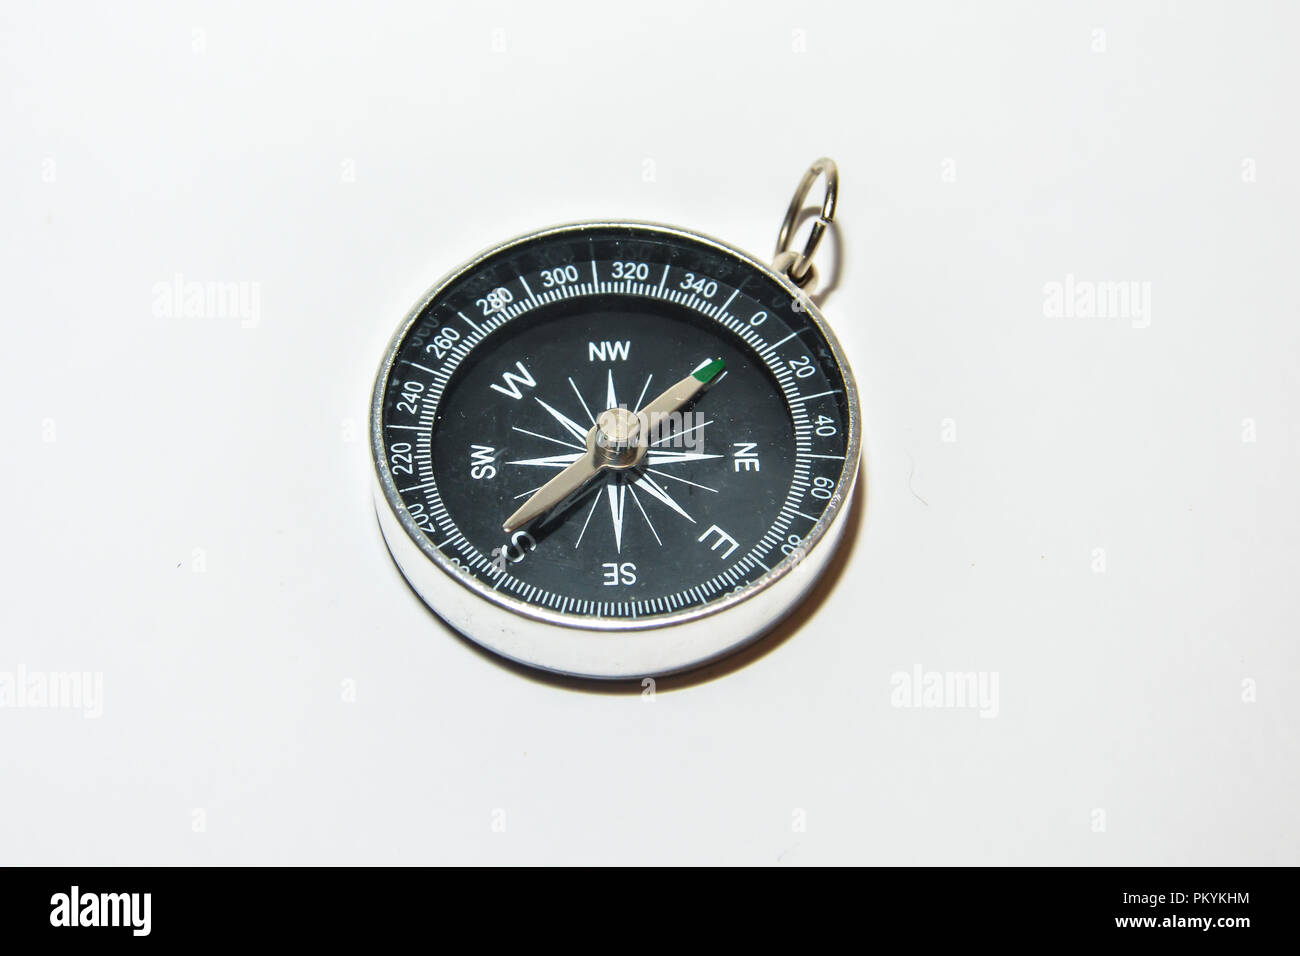 Navigation equipment for orienteering. Compass on white background. Stock Photo